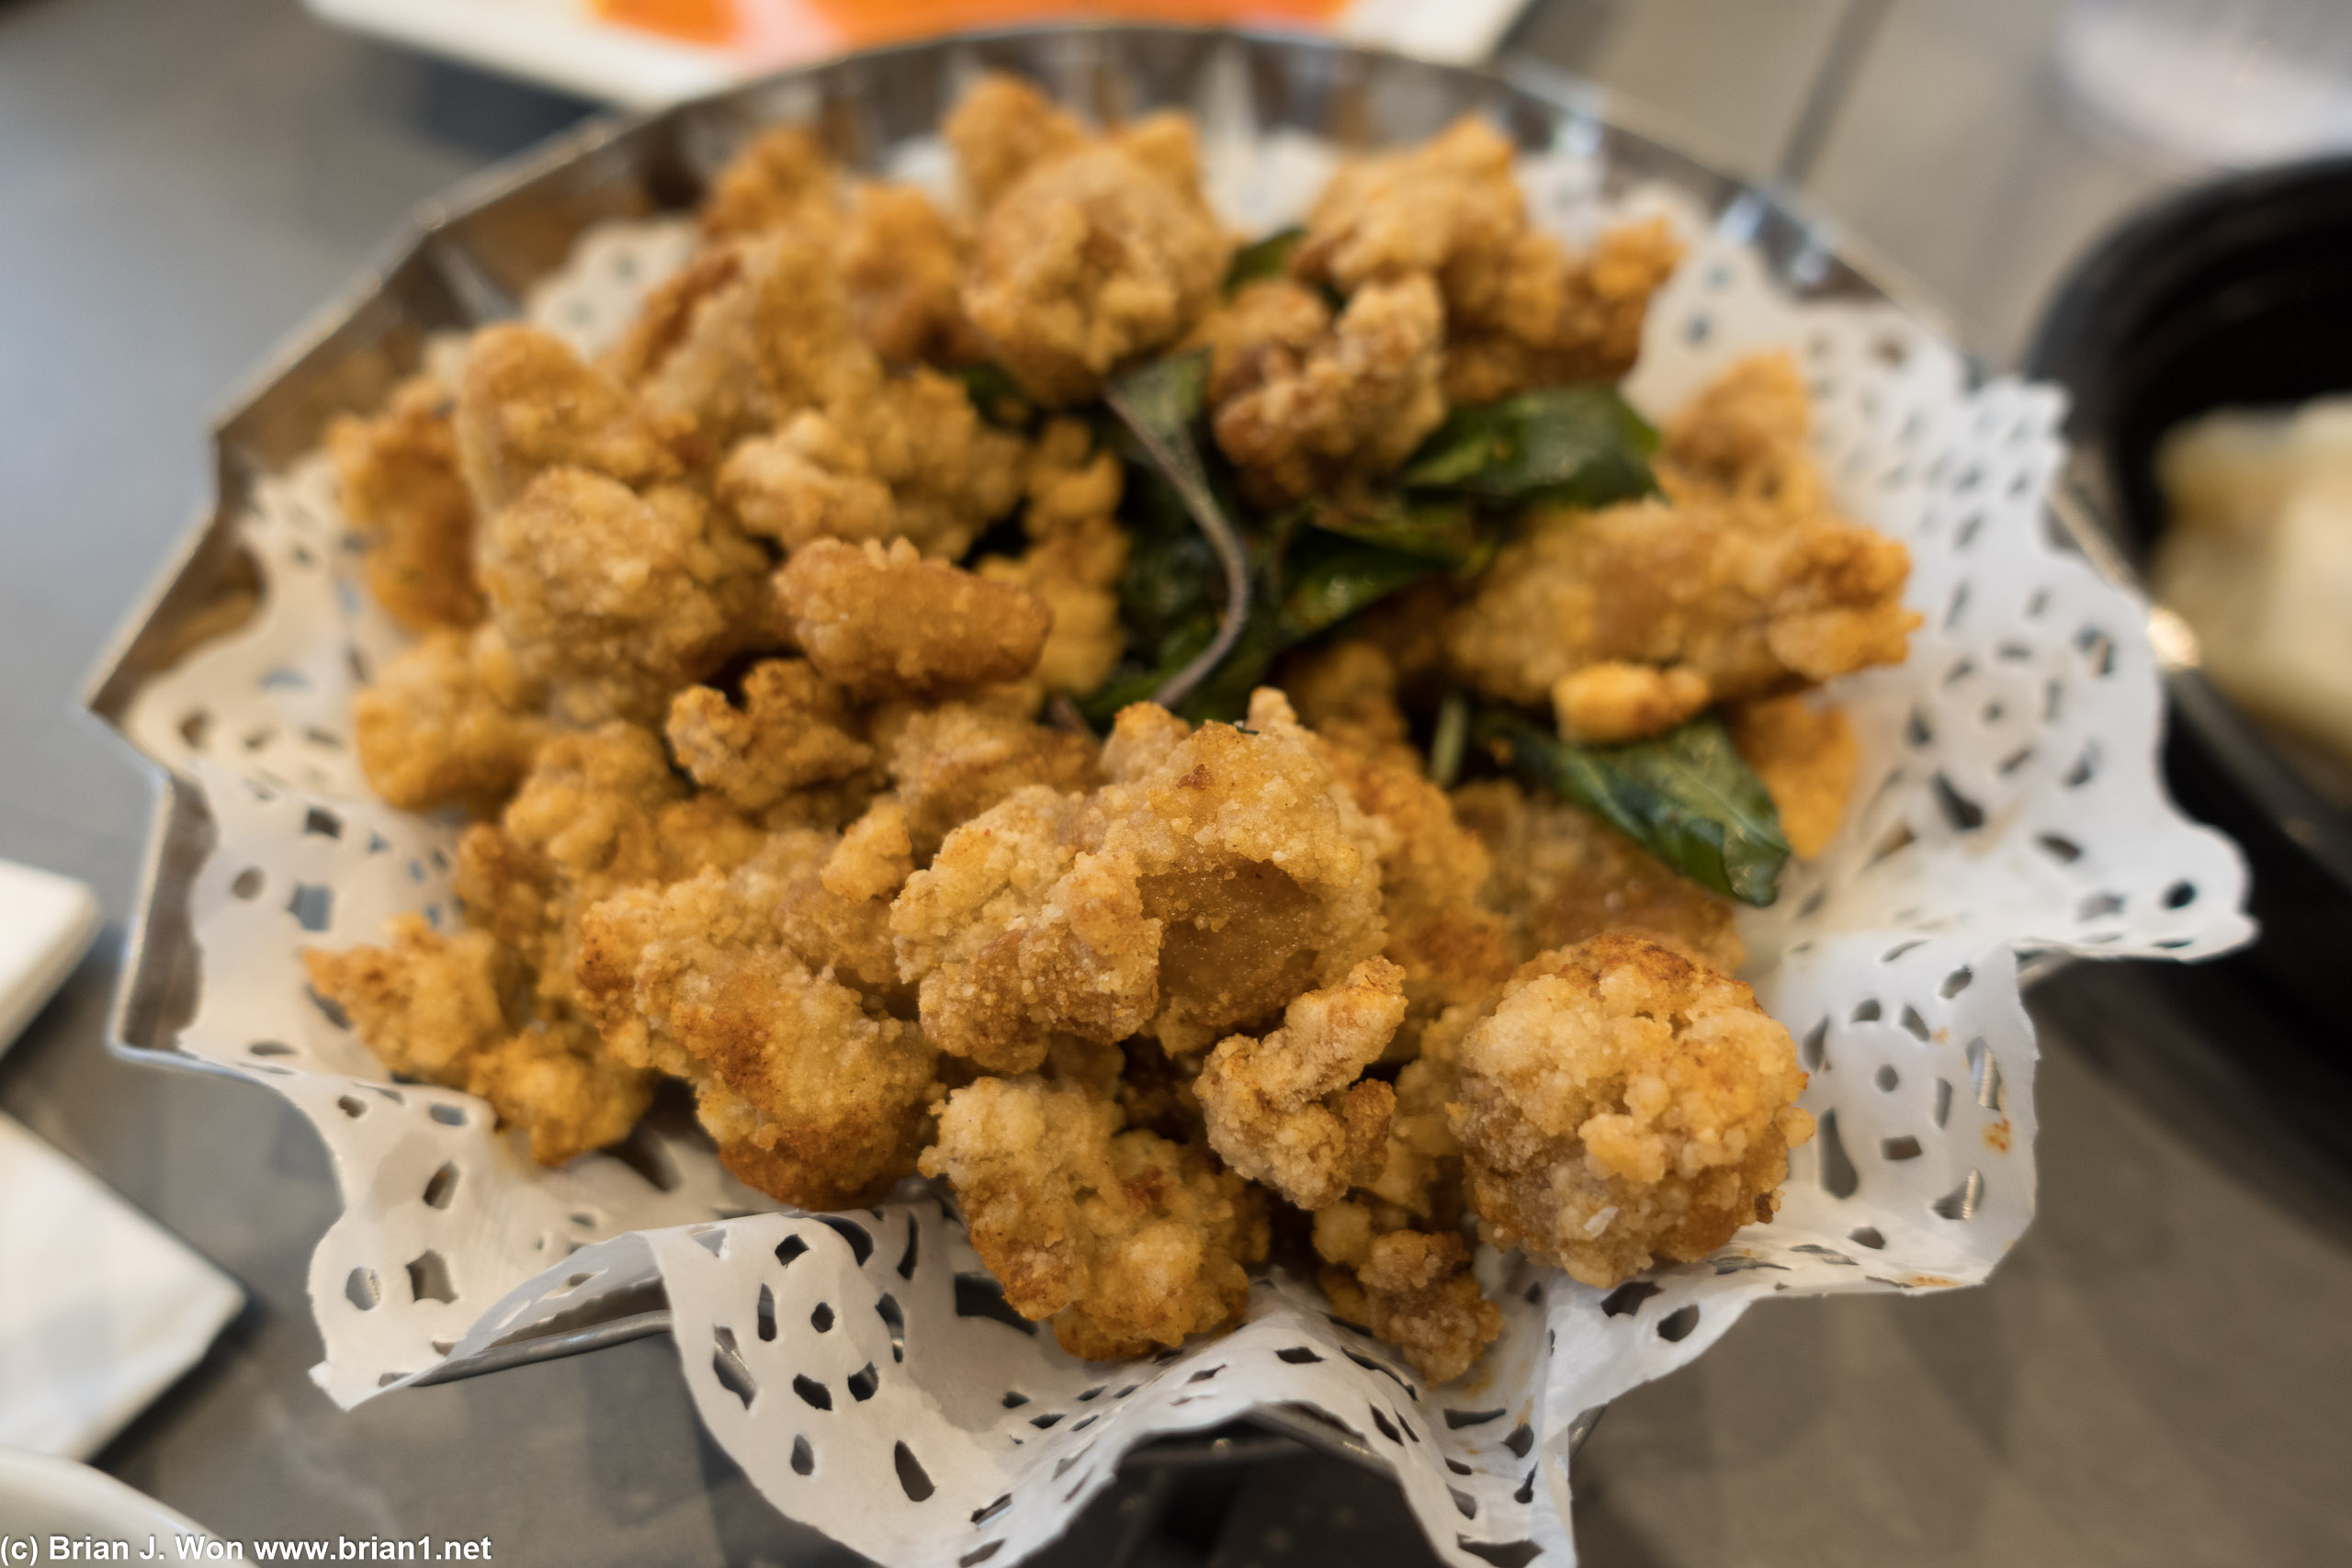 Popcorn chicken was good, but you can get good popcorn chicken a lot of places.